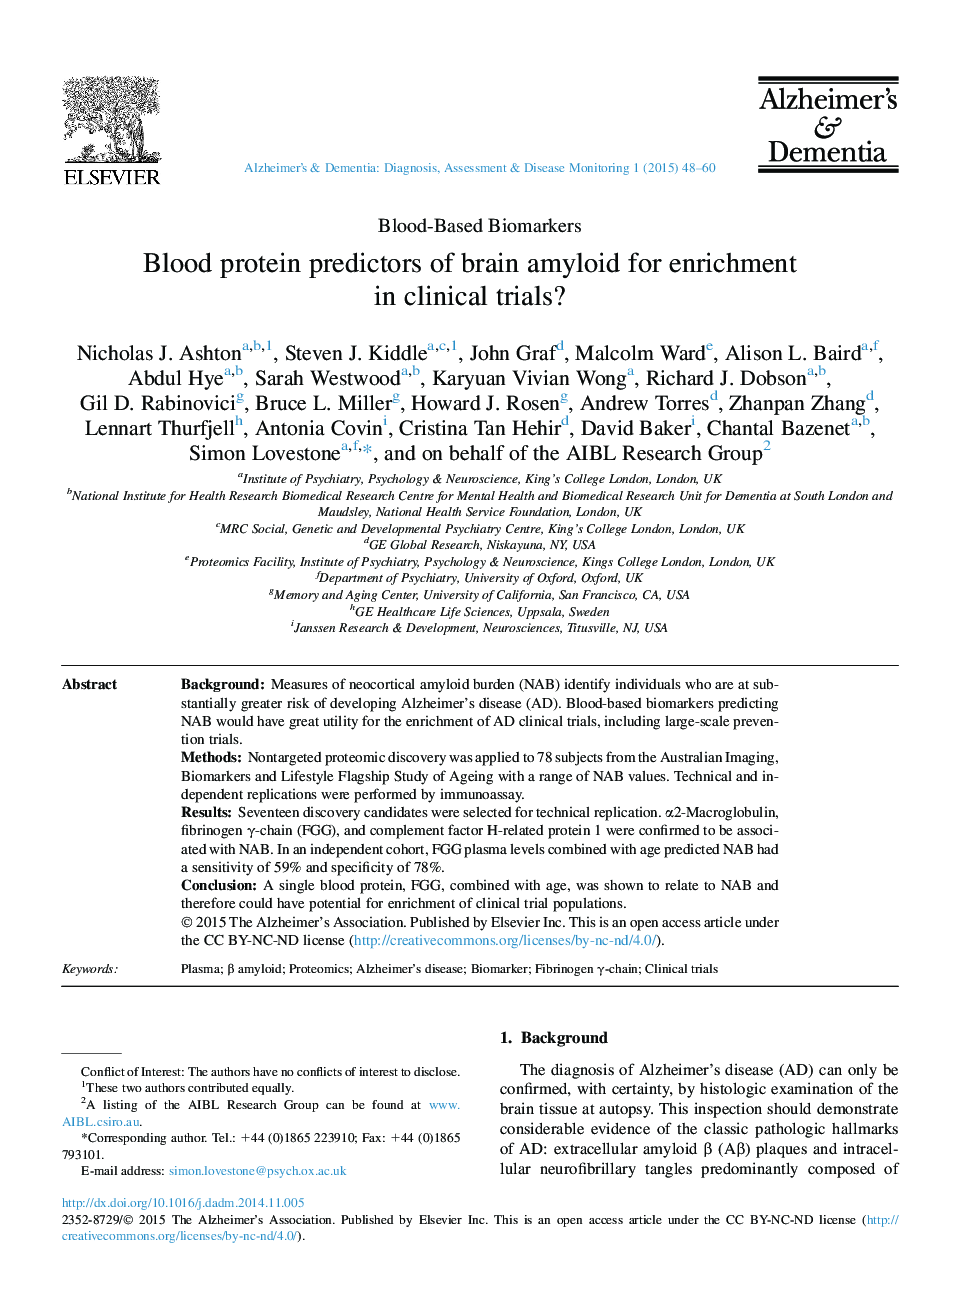 Blood protein predictors of brain amyloid for enrichment in clinical trials? 